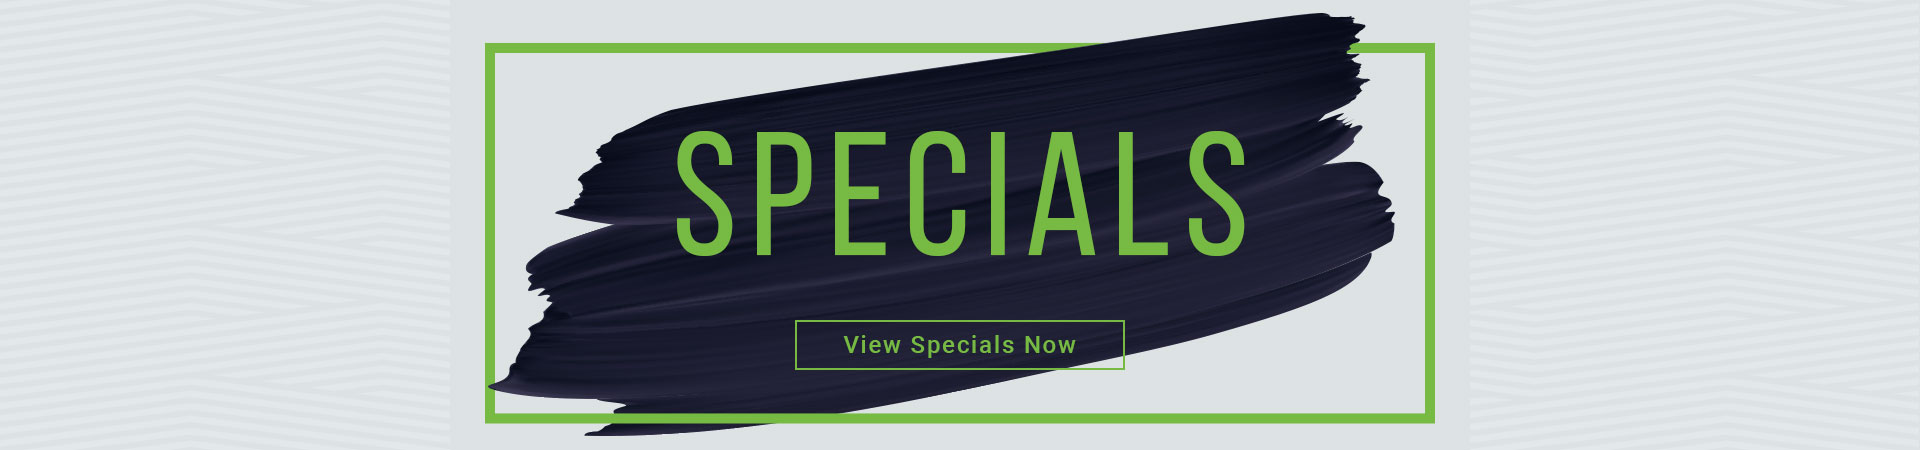 View Specials Now.